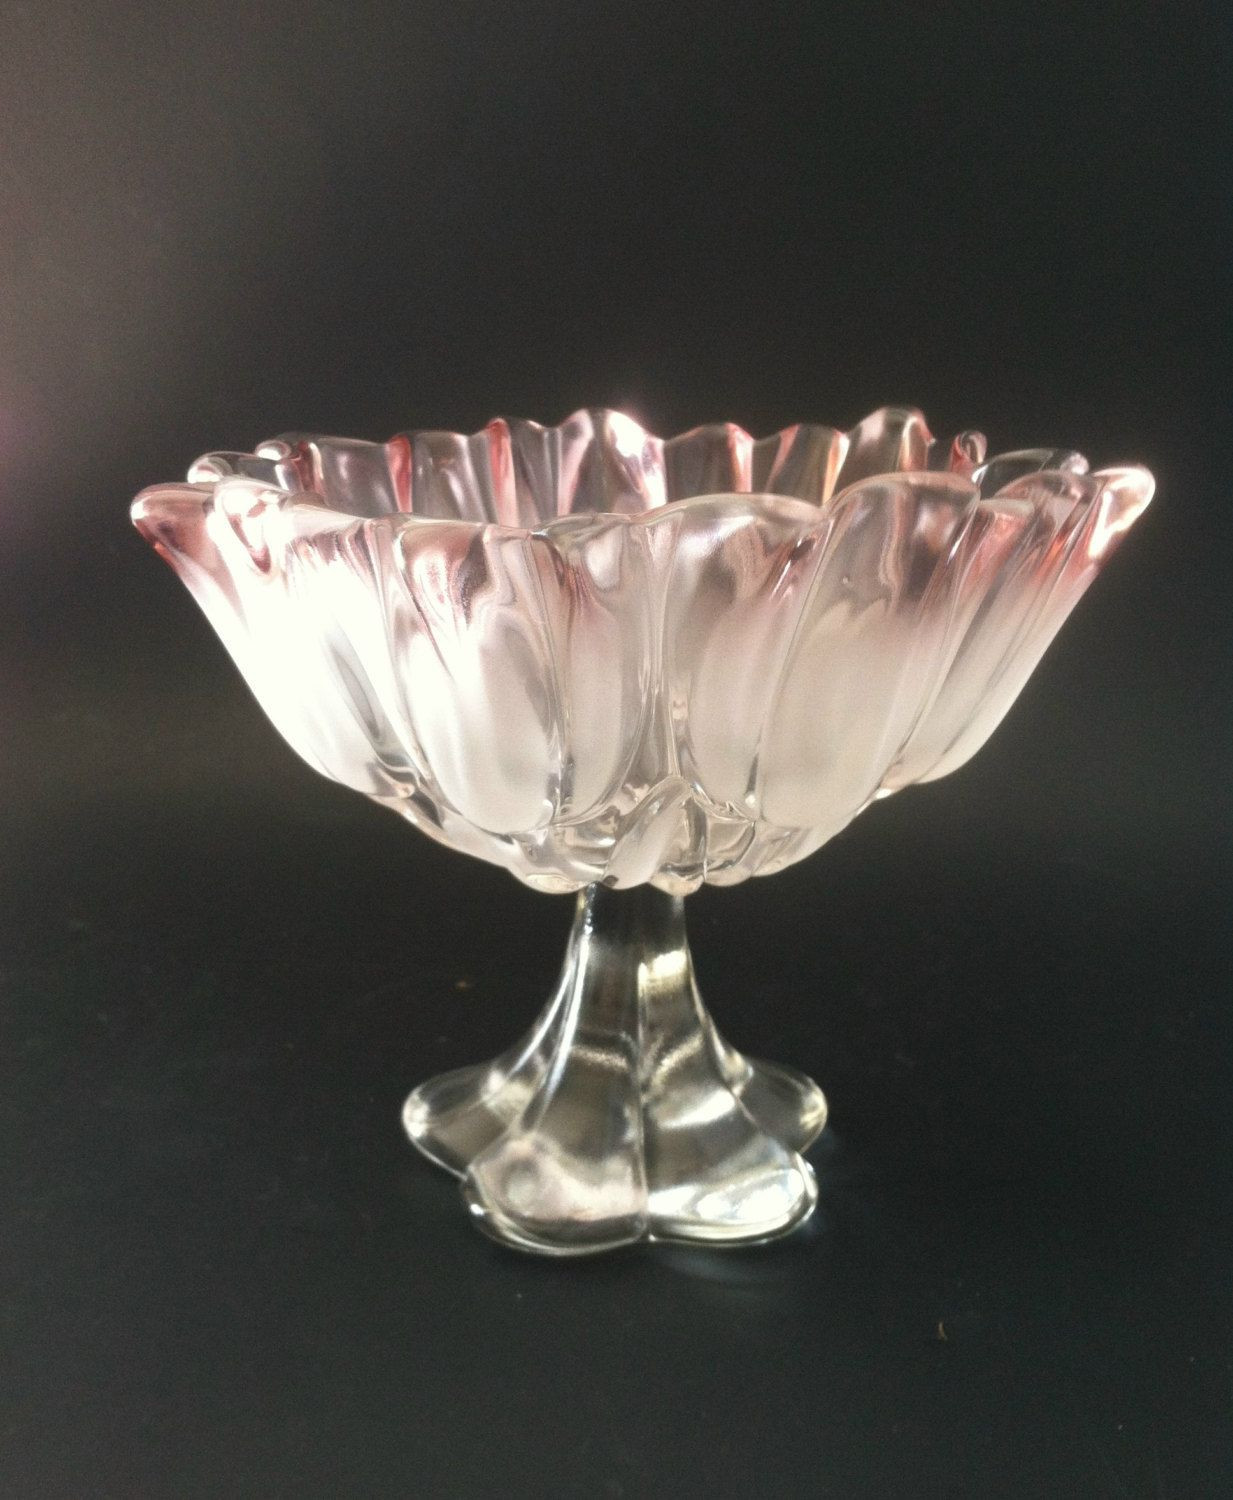 20 attractive Mikasa Florale Crystal Vase 2022 free download mikasa florale crystal vase of mikasa pink frosted tulip glass candy dish pedestal footed bowl pertaining to mikasa pink frosted tulip glass candy dish pedestal footed bowl floral dish bon